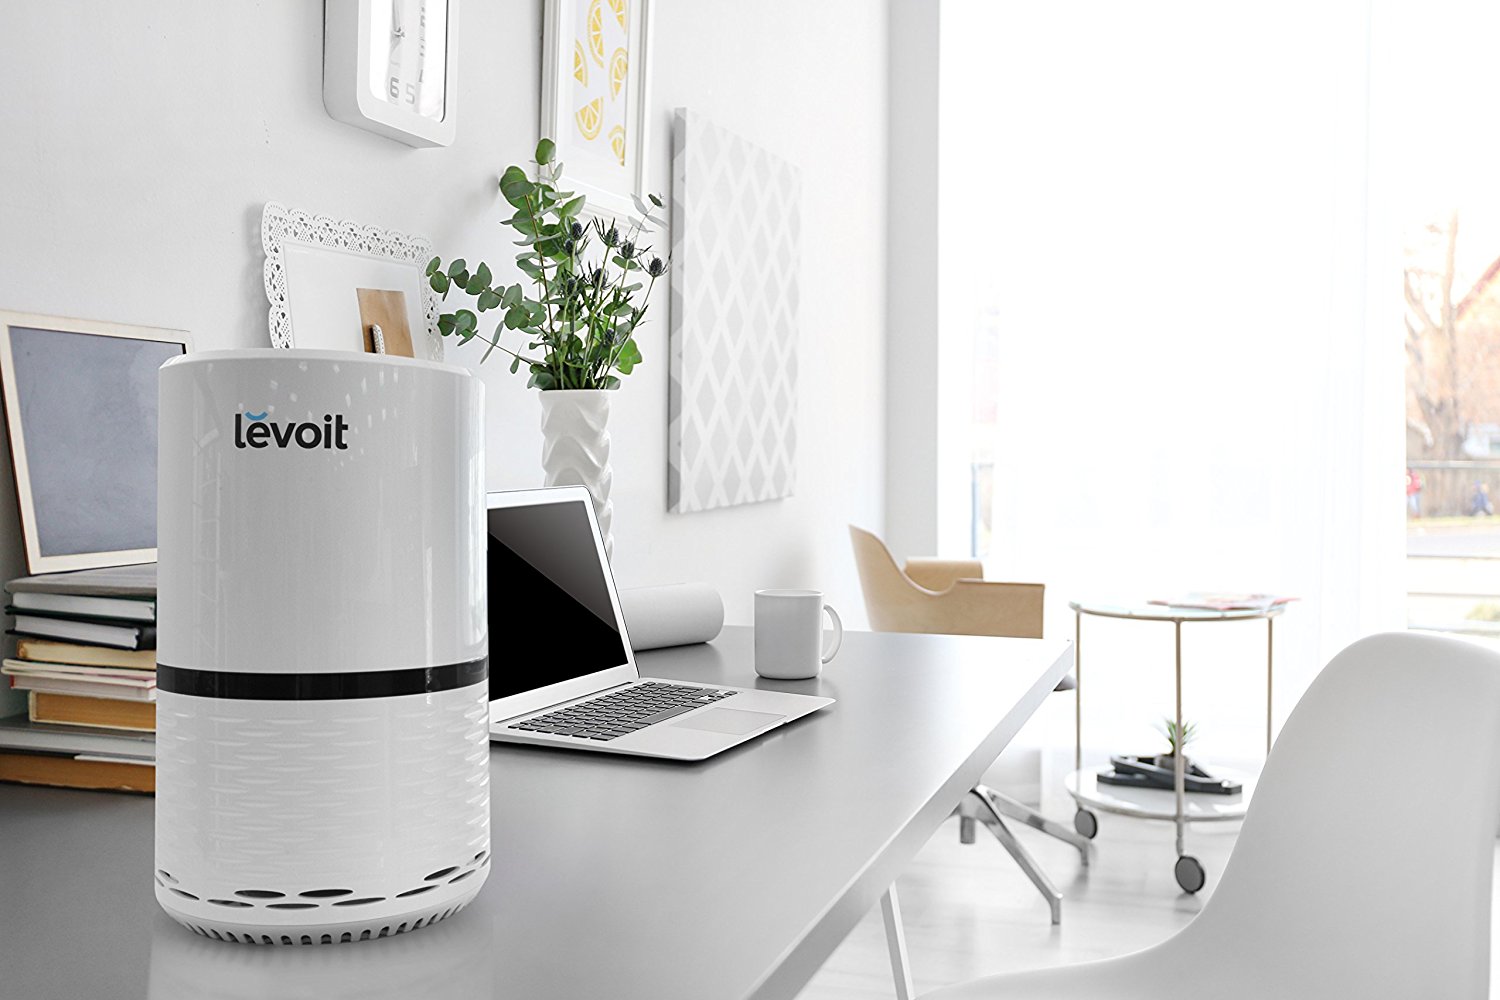 Levoit LV-H132 Air Purifier with True Hepa Filter for Smoke, Bacteria, and More - image 3 of 9